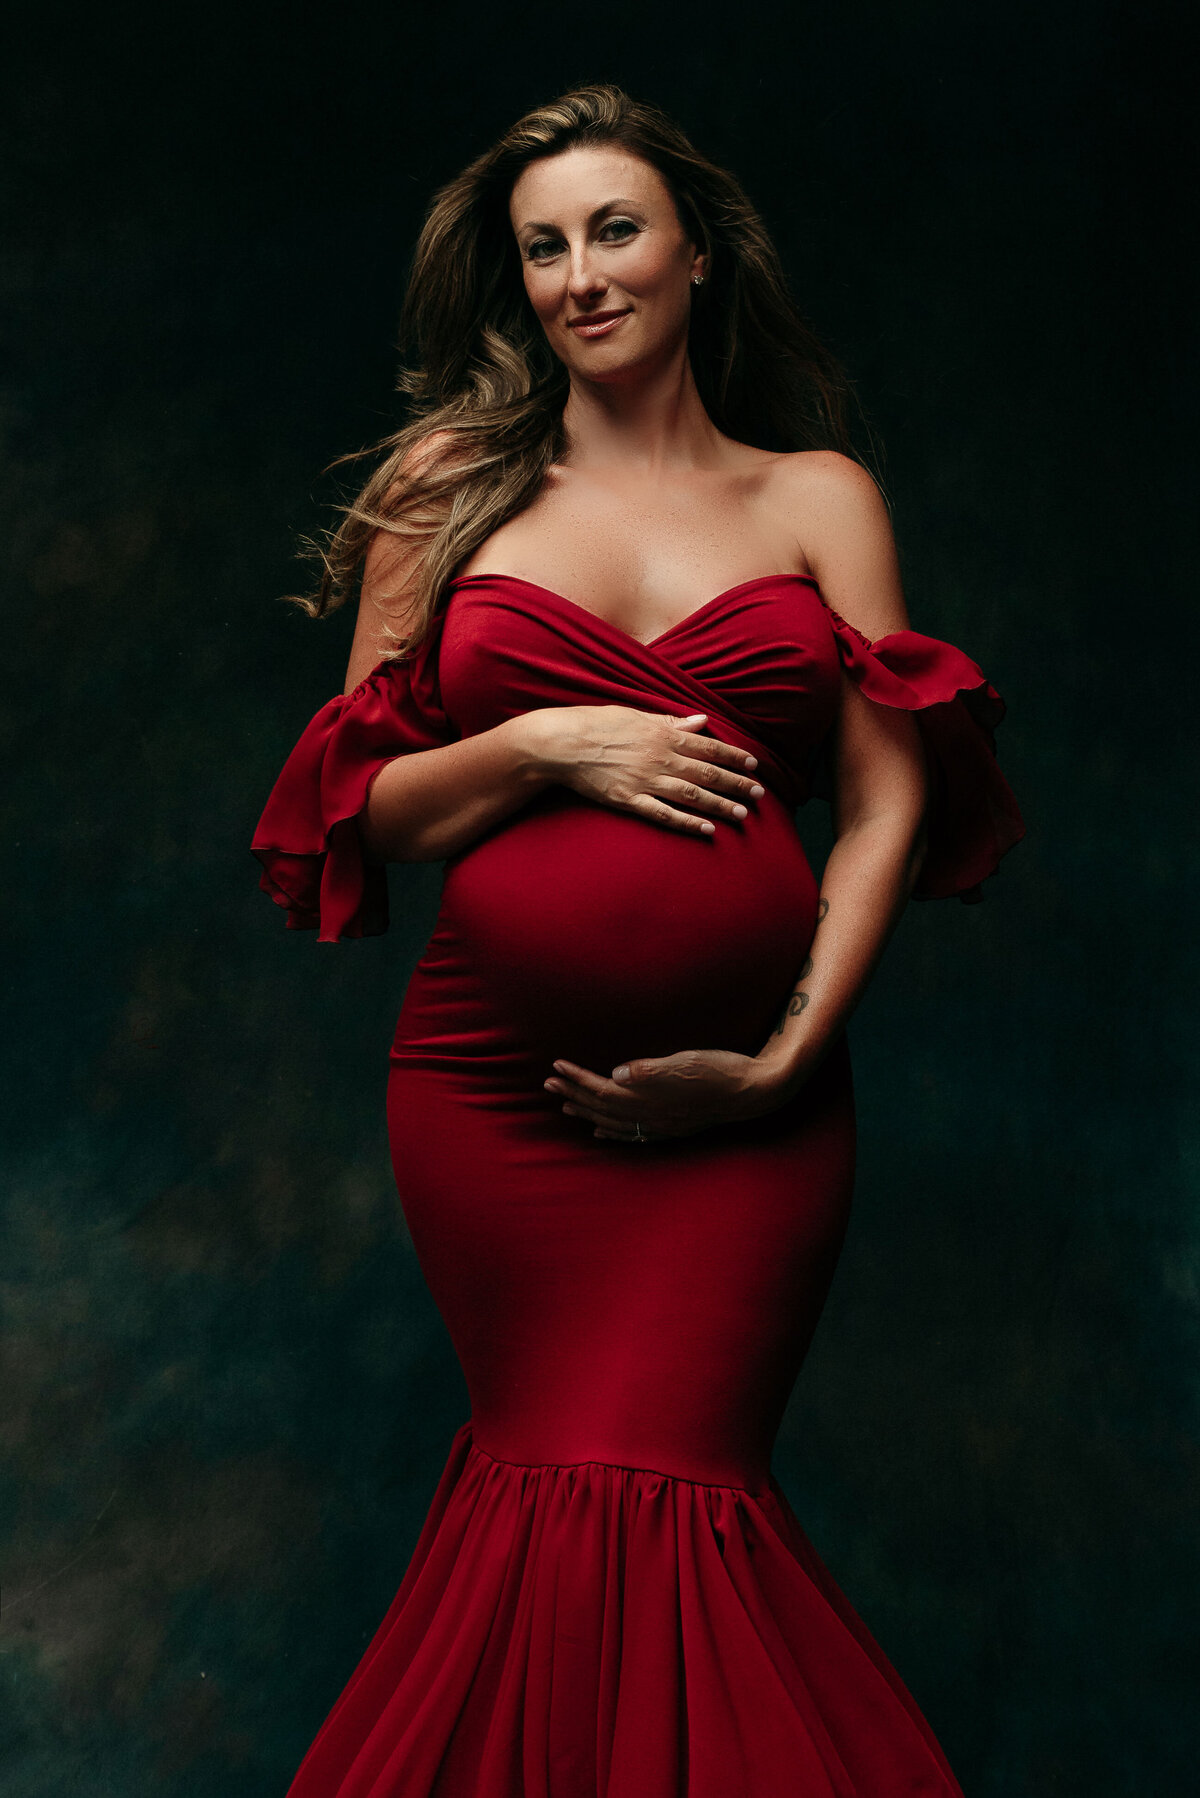 Maternity portrait of woman with long dirty blonde hair wearing maroon dress holding baby bump while smiling and standing on dark gray background